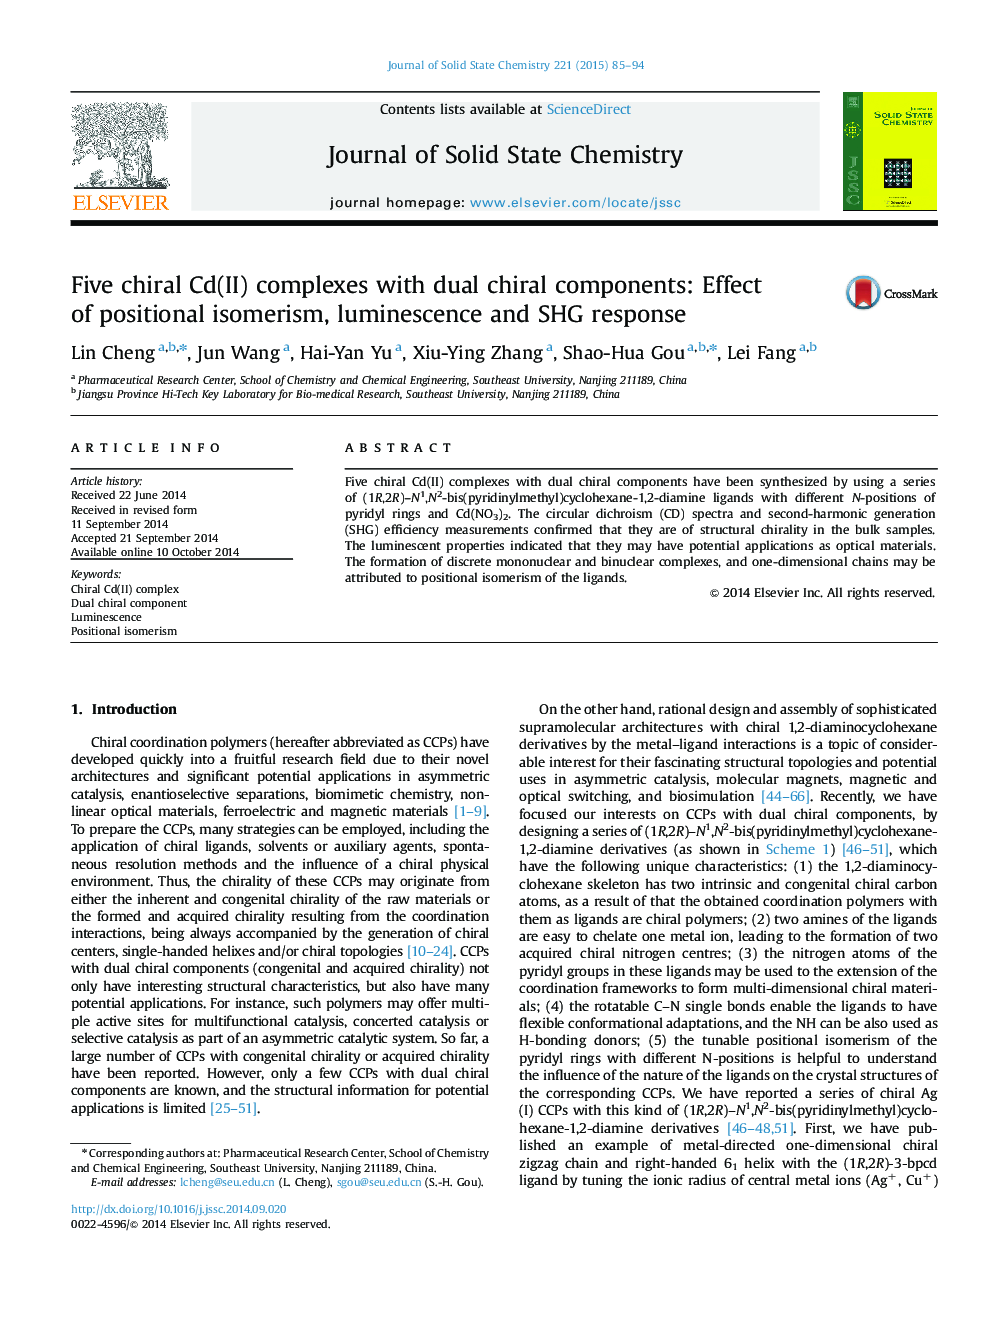 Five chiral Cd(II) complexes with dual chiral components: Effect of positional isomerism, luminescence and SHG response